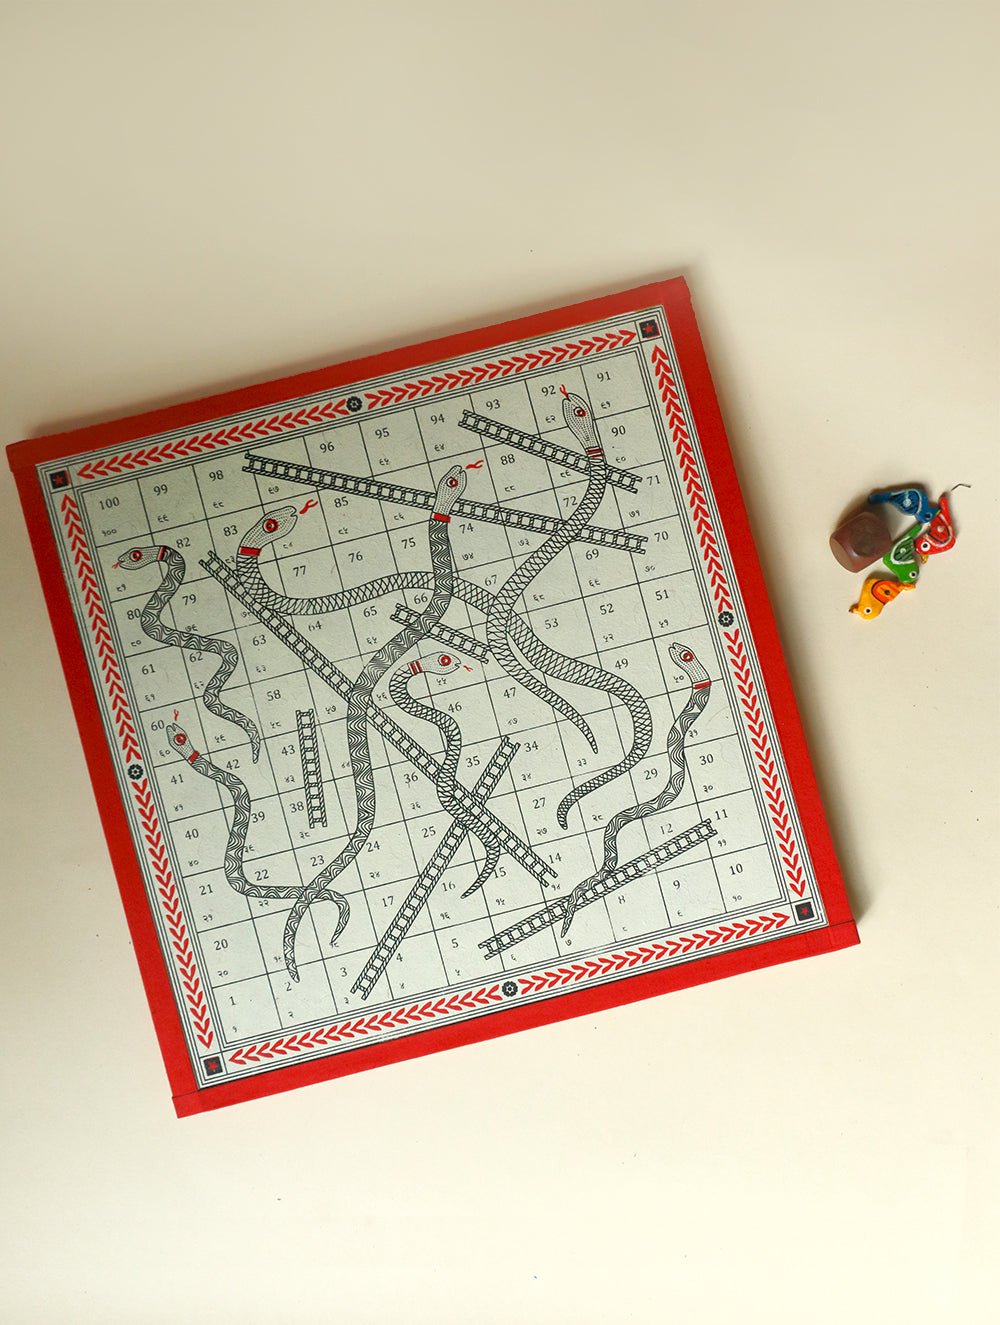 Load image into Gallery viewer, Handcrafted Snakes &amp; Ladders Board Game - The India Craft House 